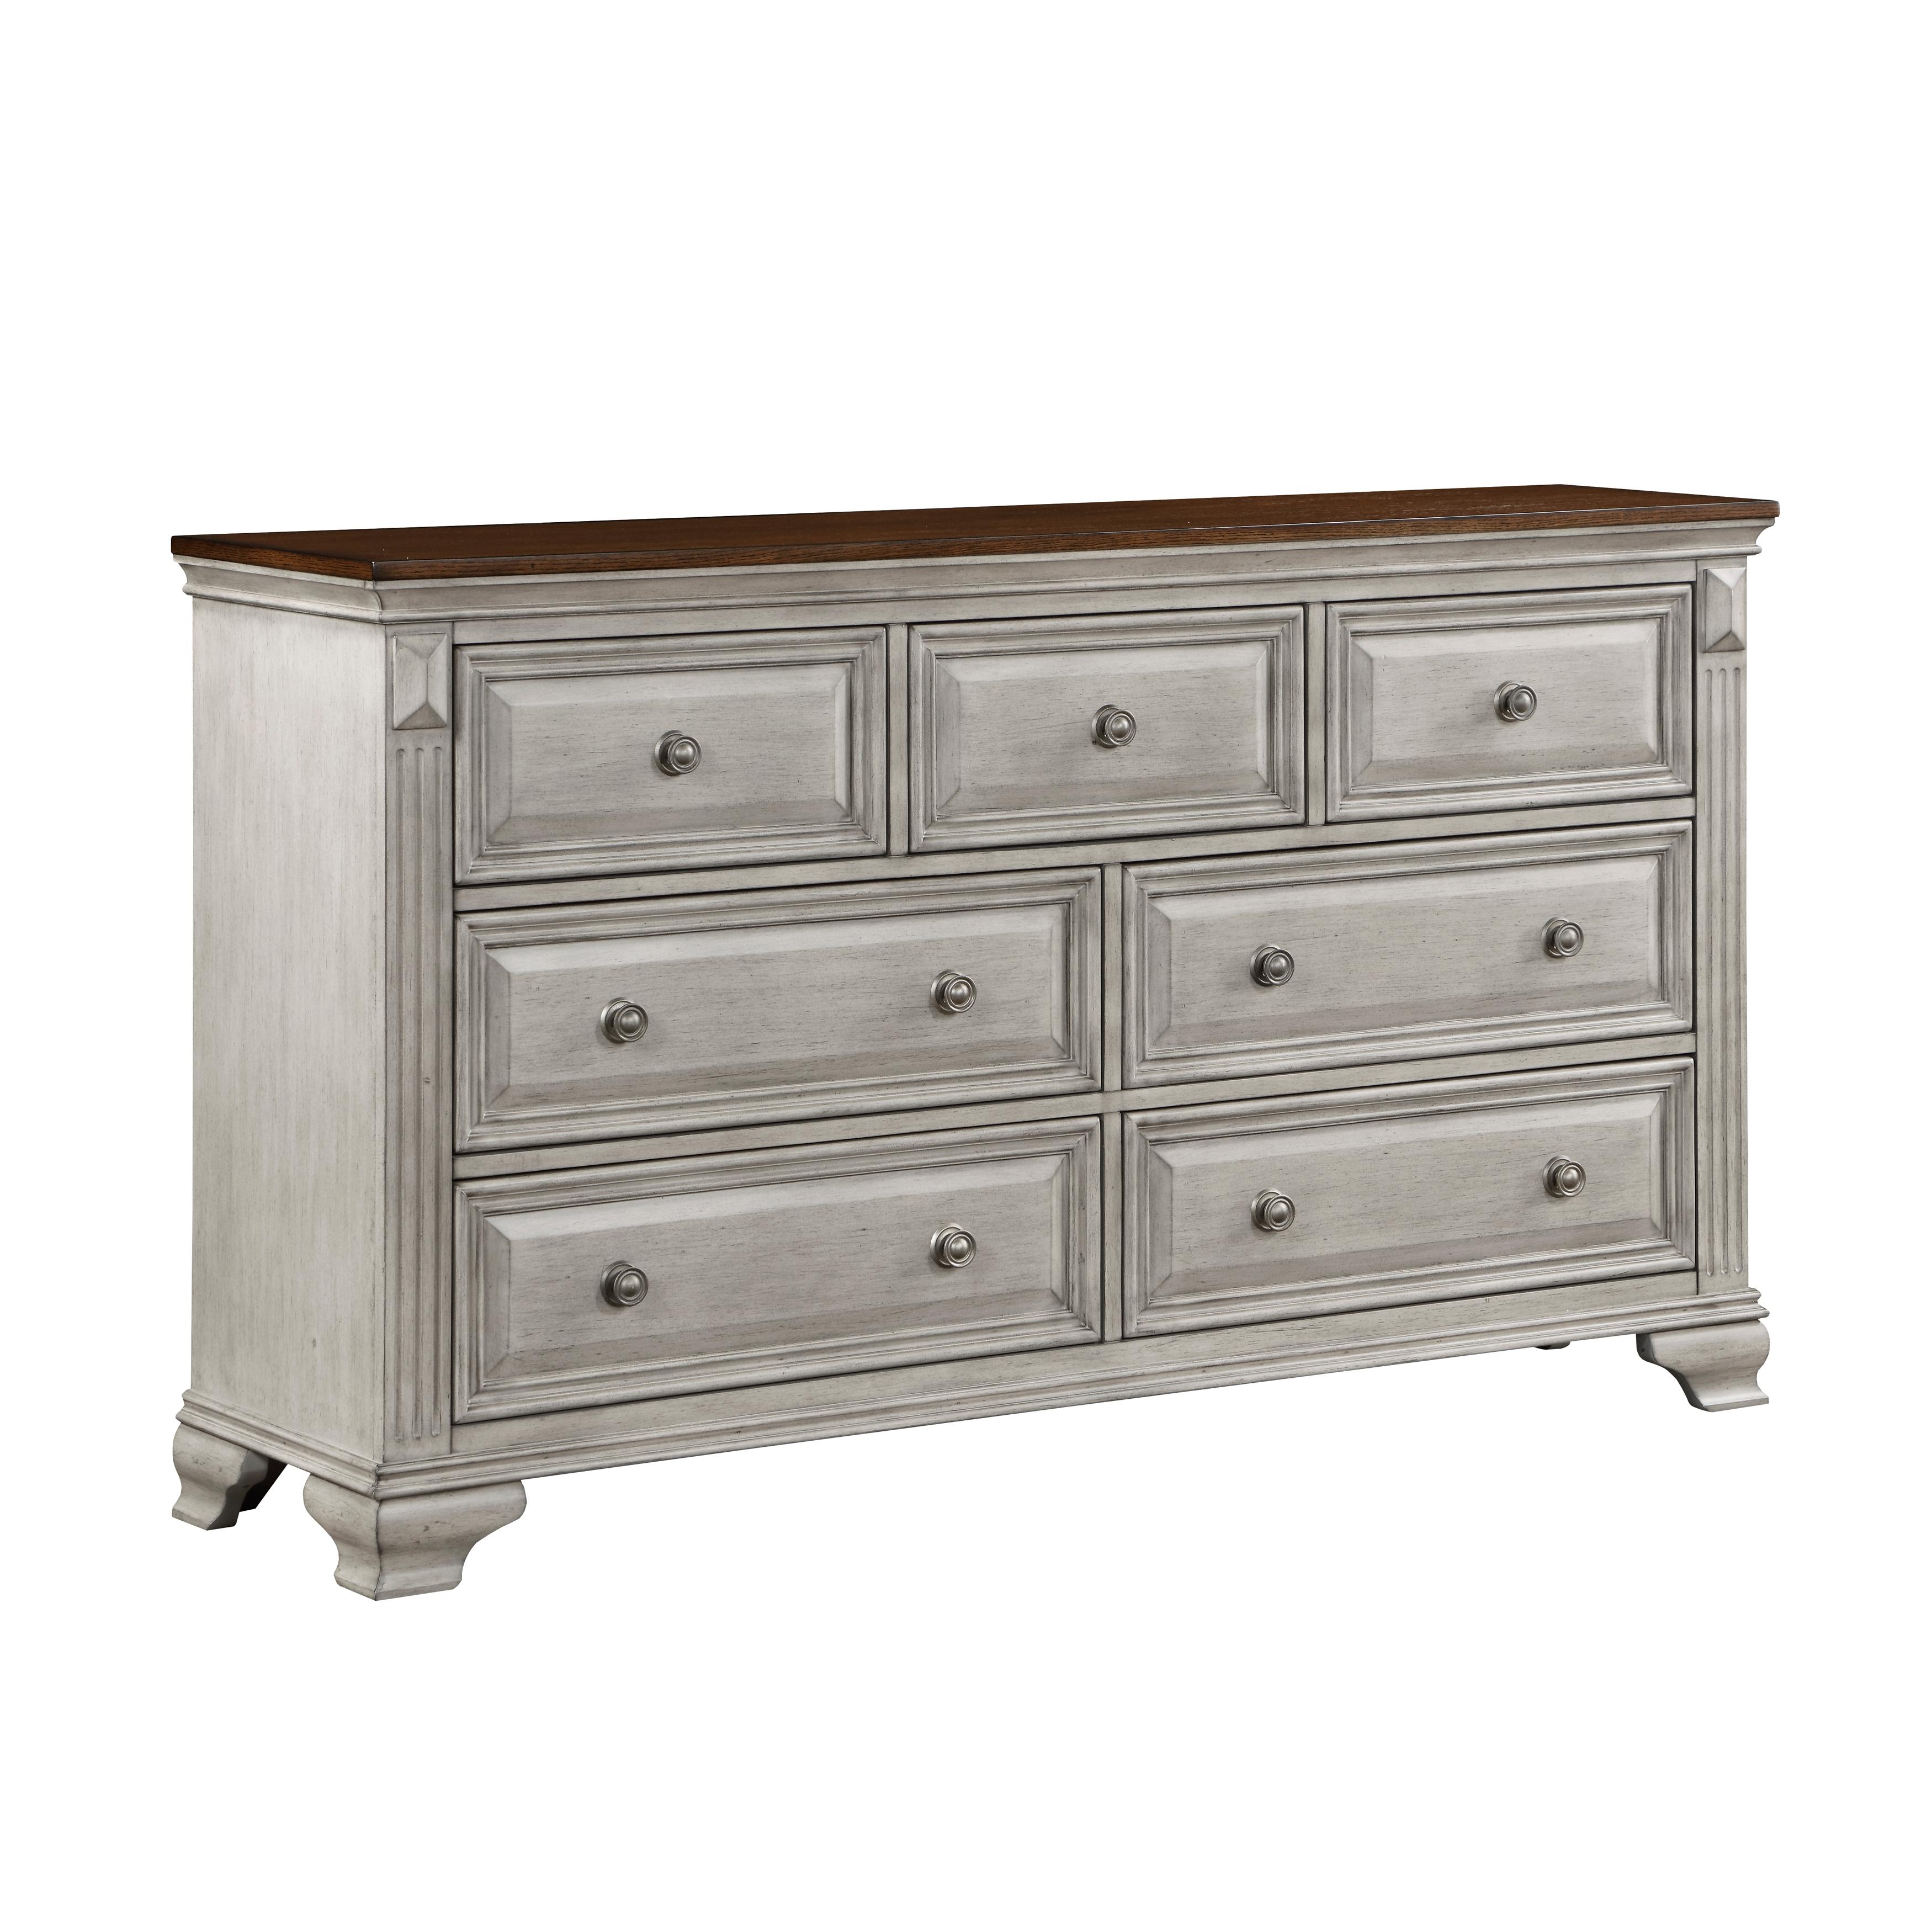 Traditional Dresser With Mirror Marquette Dresser With Mirror 1449-5-D-2PCS 1449-5-D-2PCS in Gray, Brown 